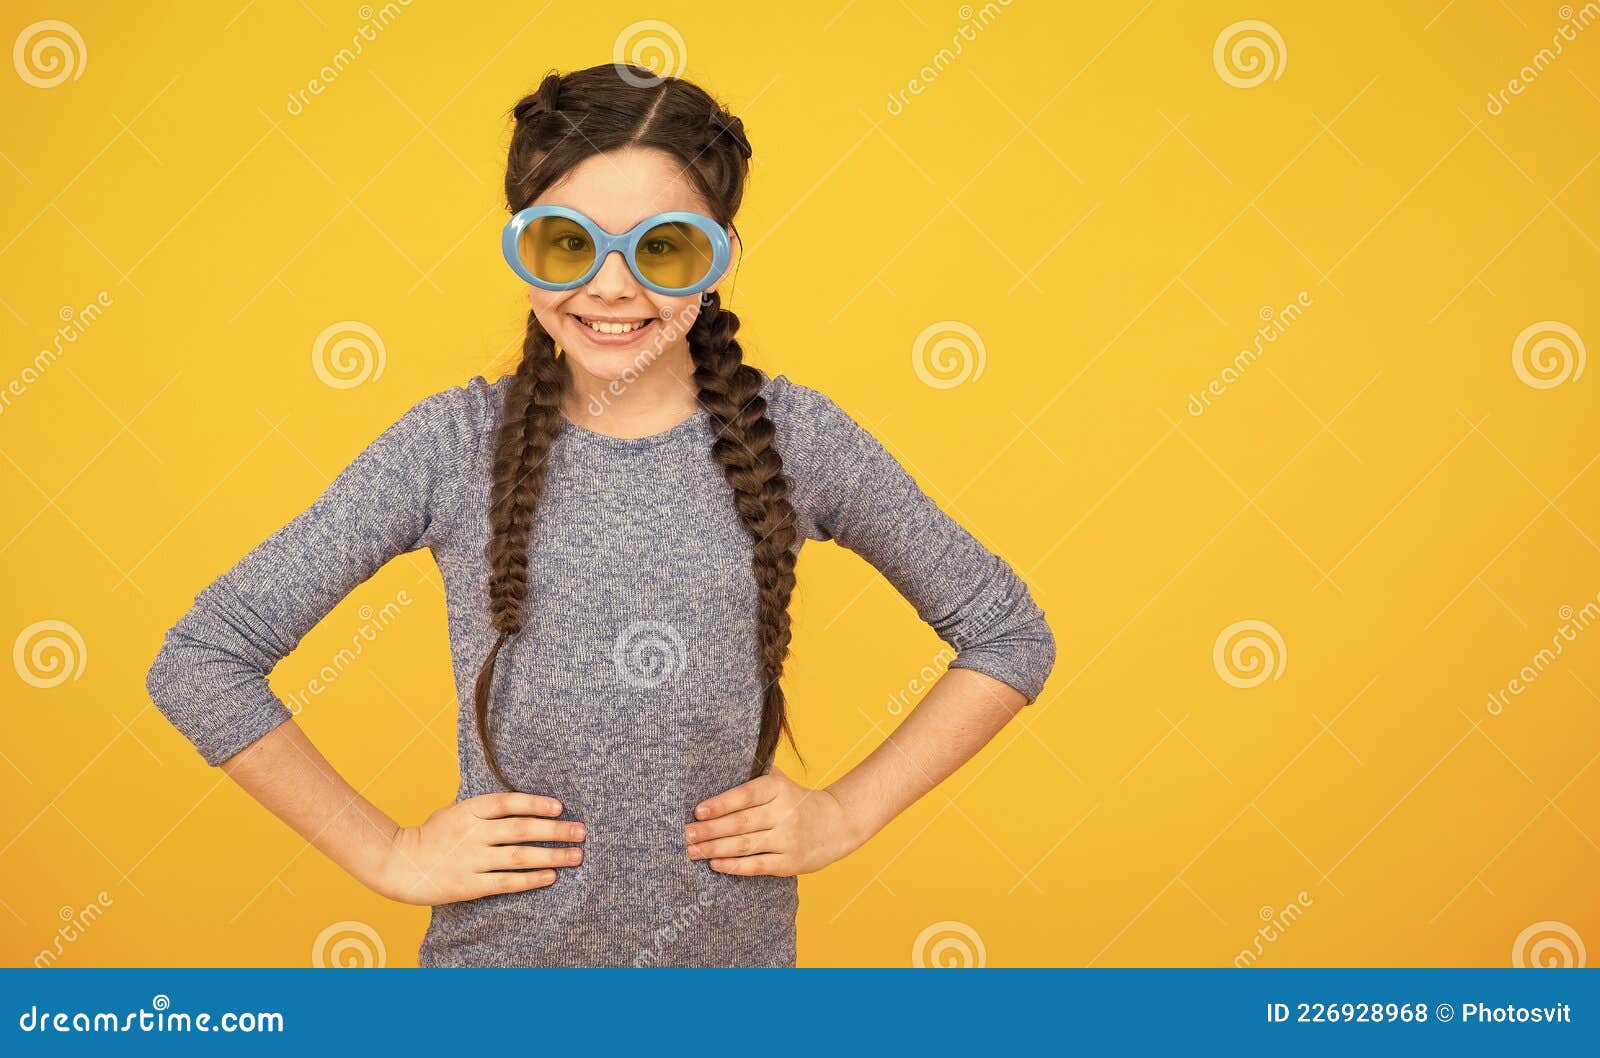 Ready for Vacation. Smiling Child on Vacation. Casual Fashion Trend.  Braided Hair in Pigtails Stock Photo - Image of look, adorable: 226928968